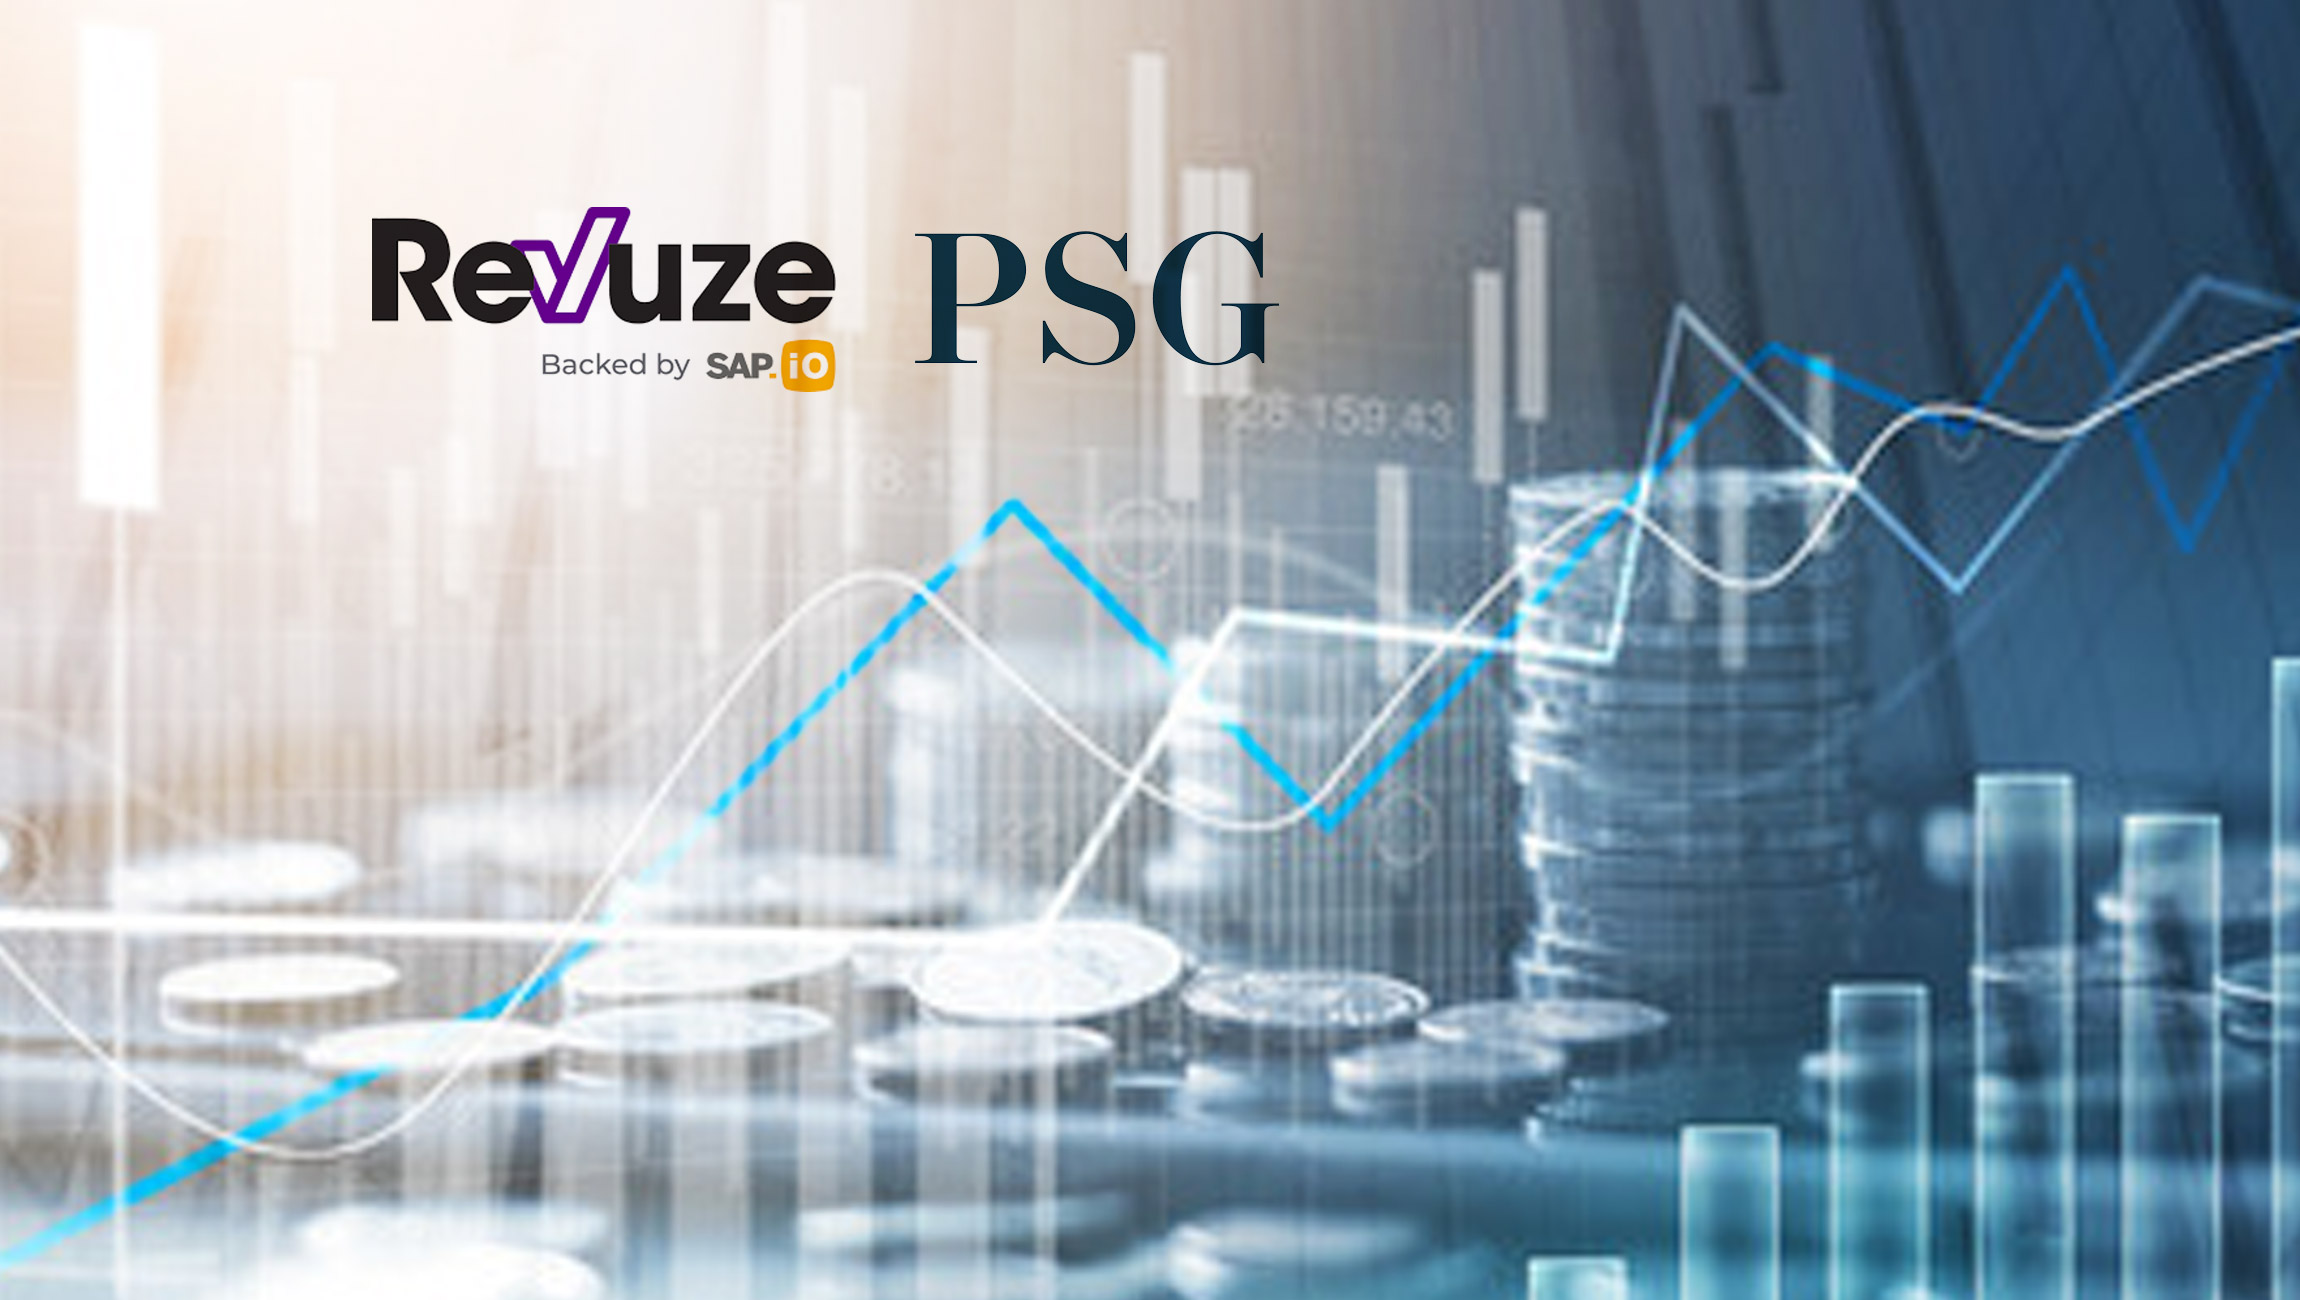 Revuze Announces $12 Million Growth Equity Investment Led by PSG 12